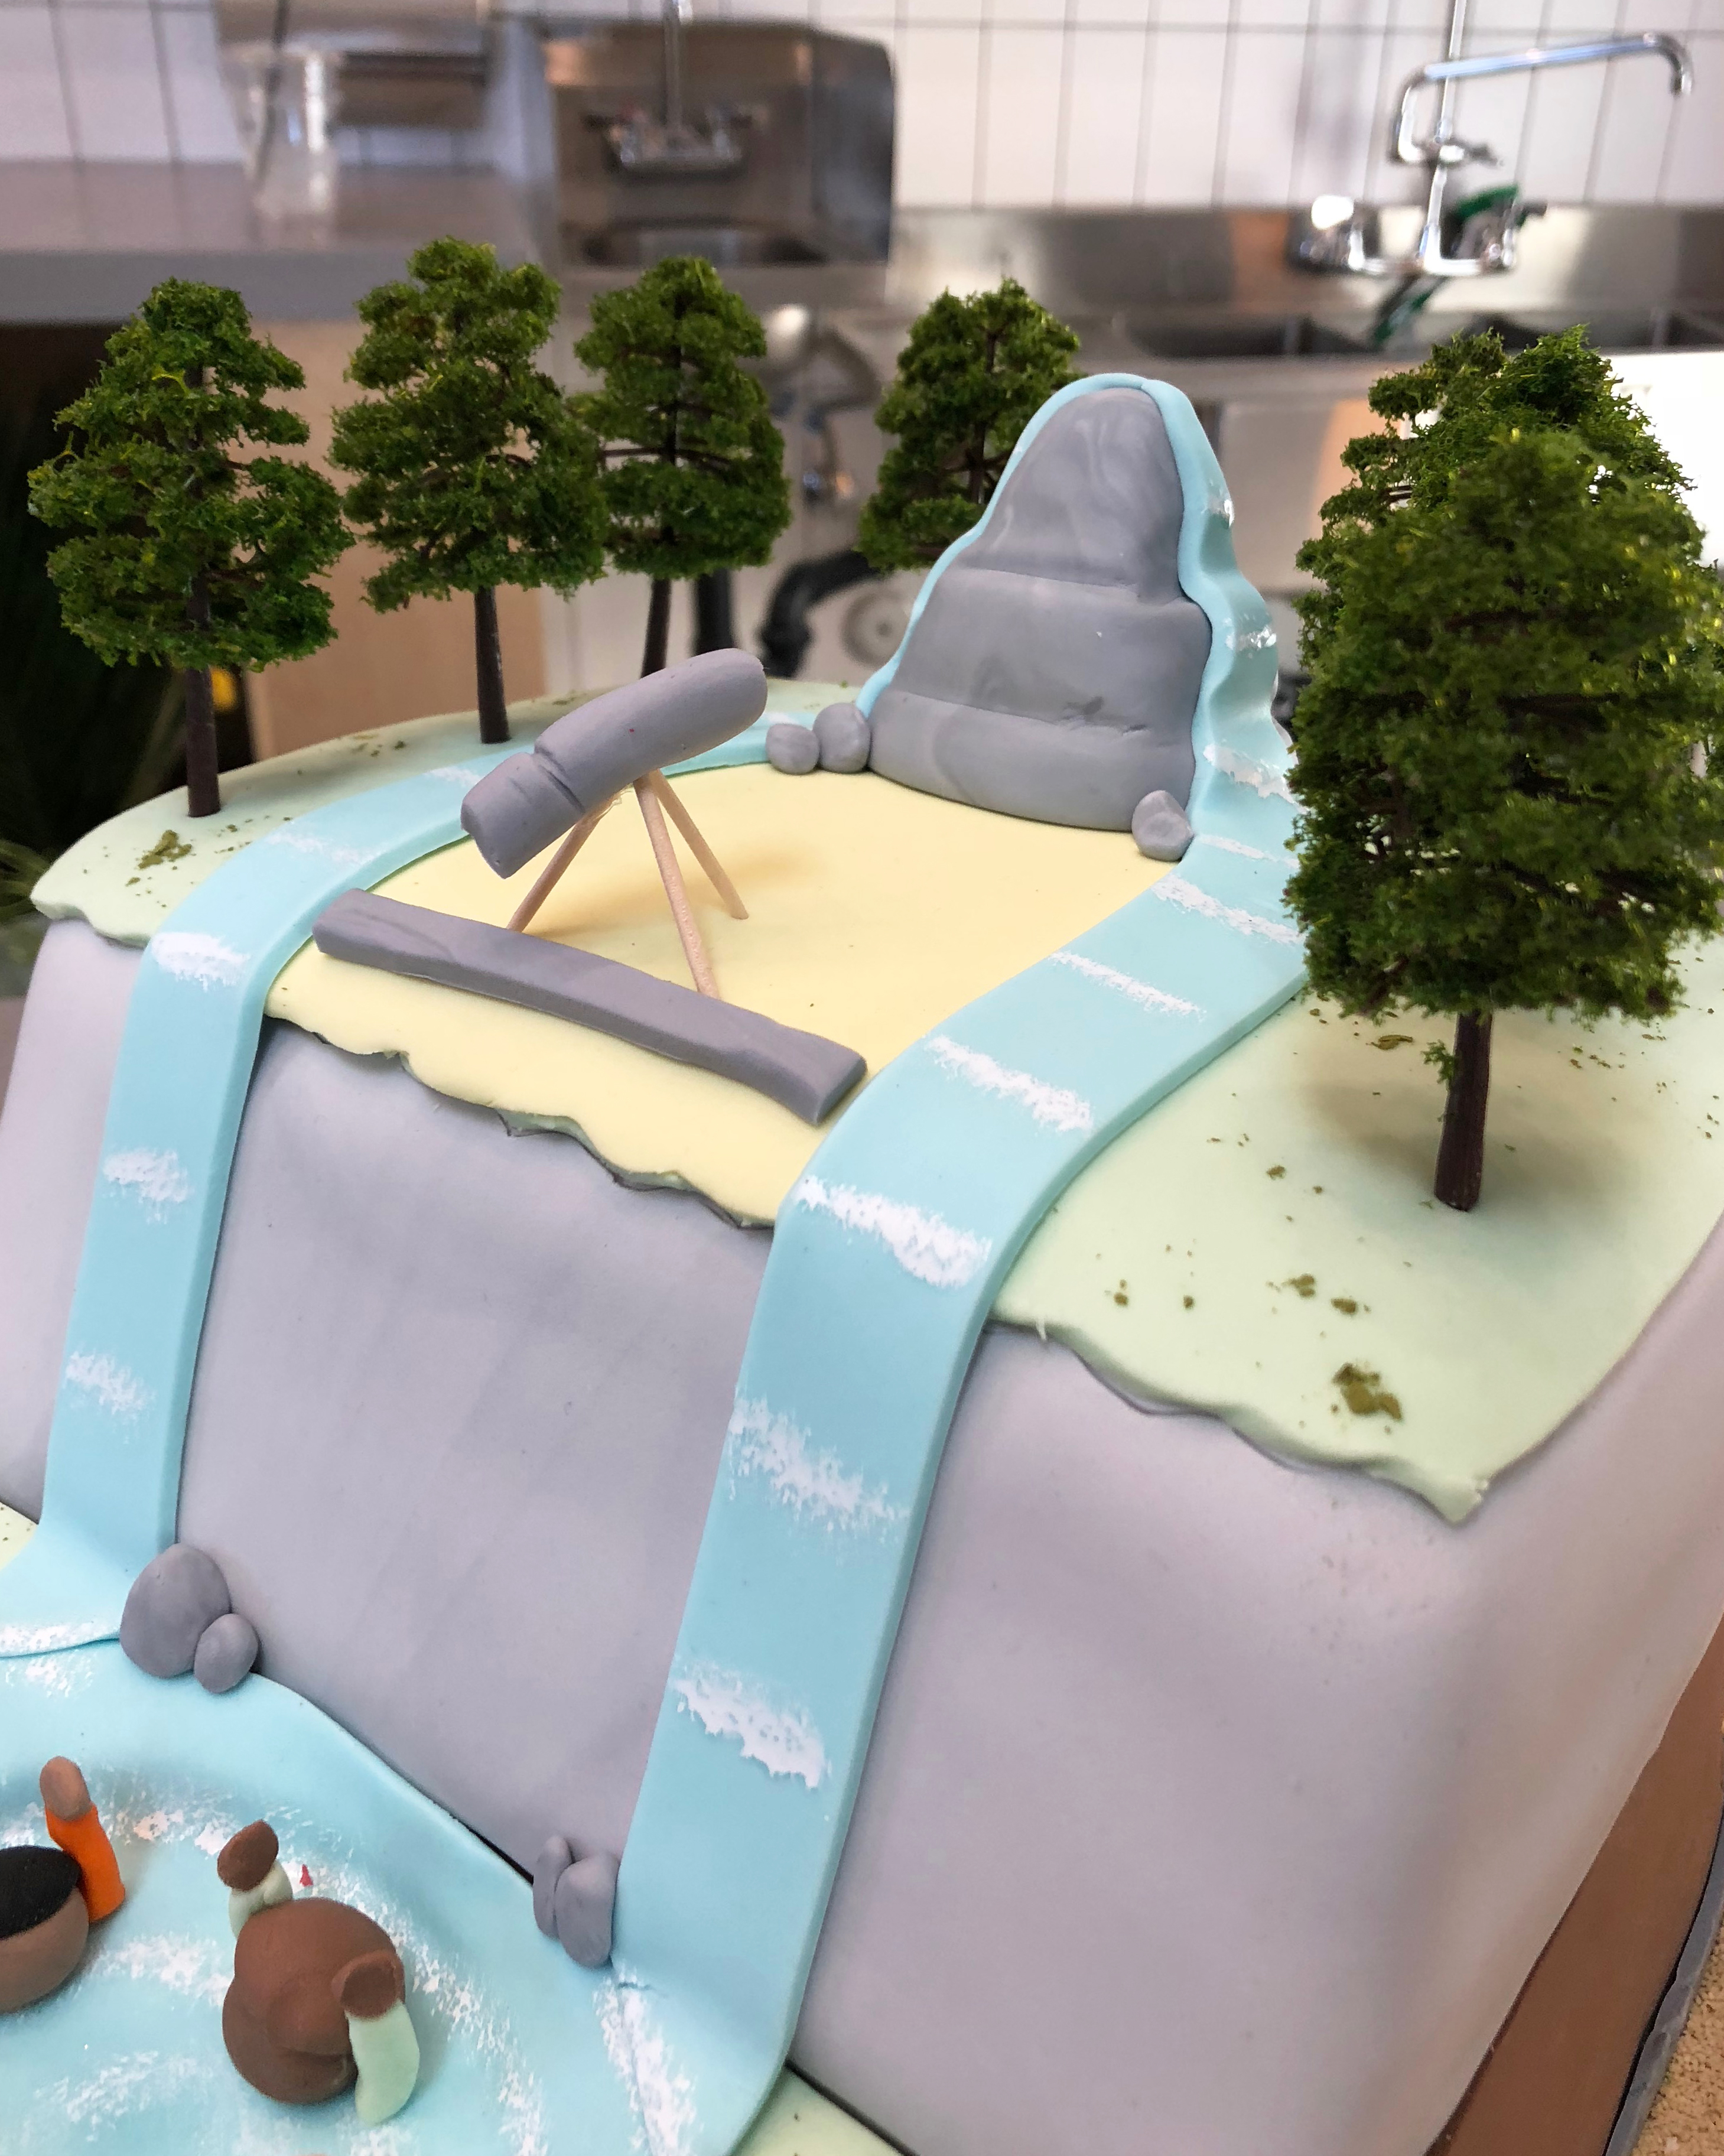 Detail of the cake showing a telescope surrounded by trees and rock with gushing water